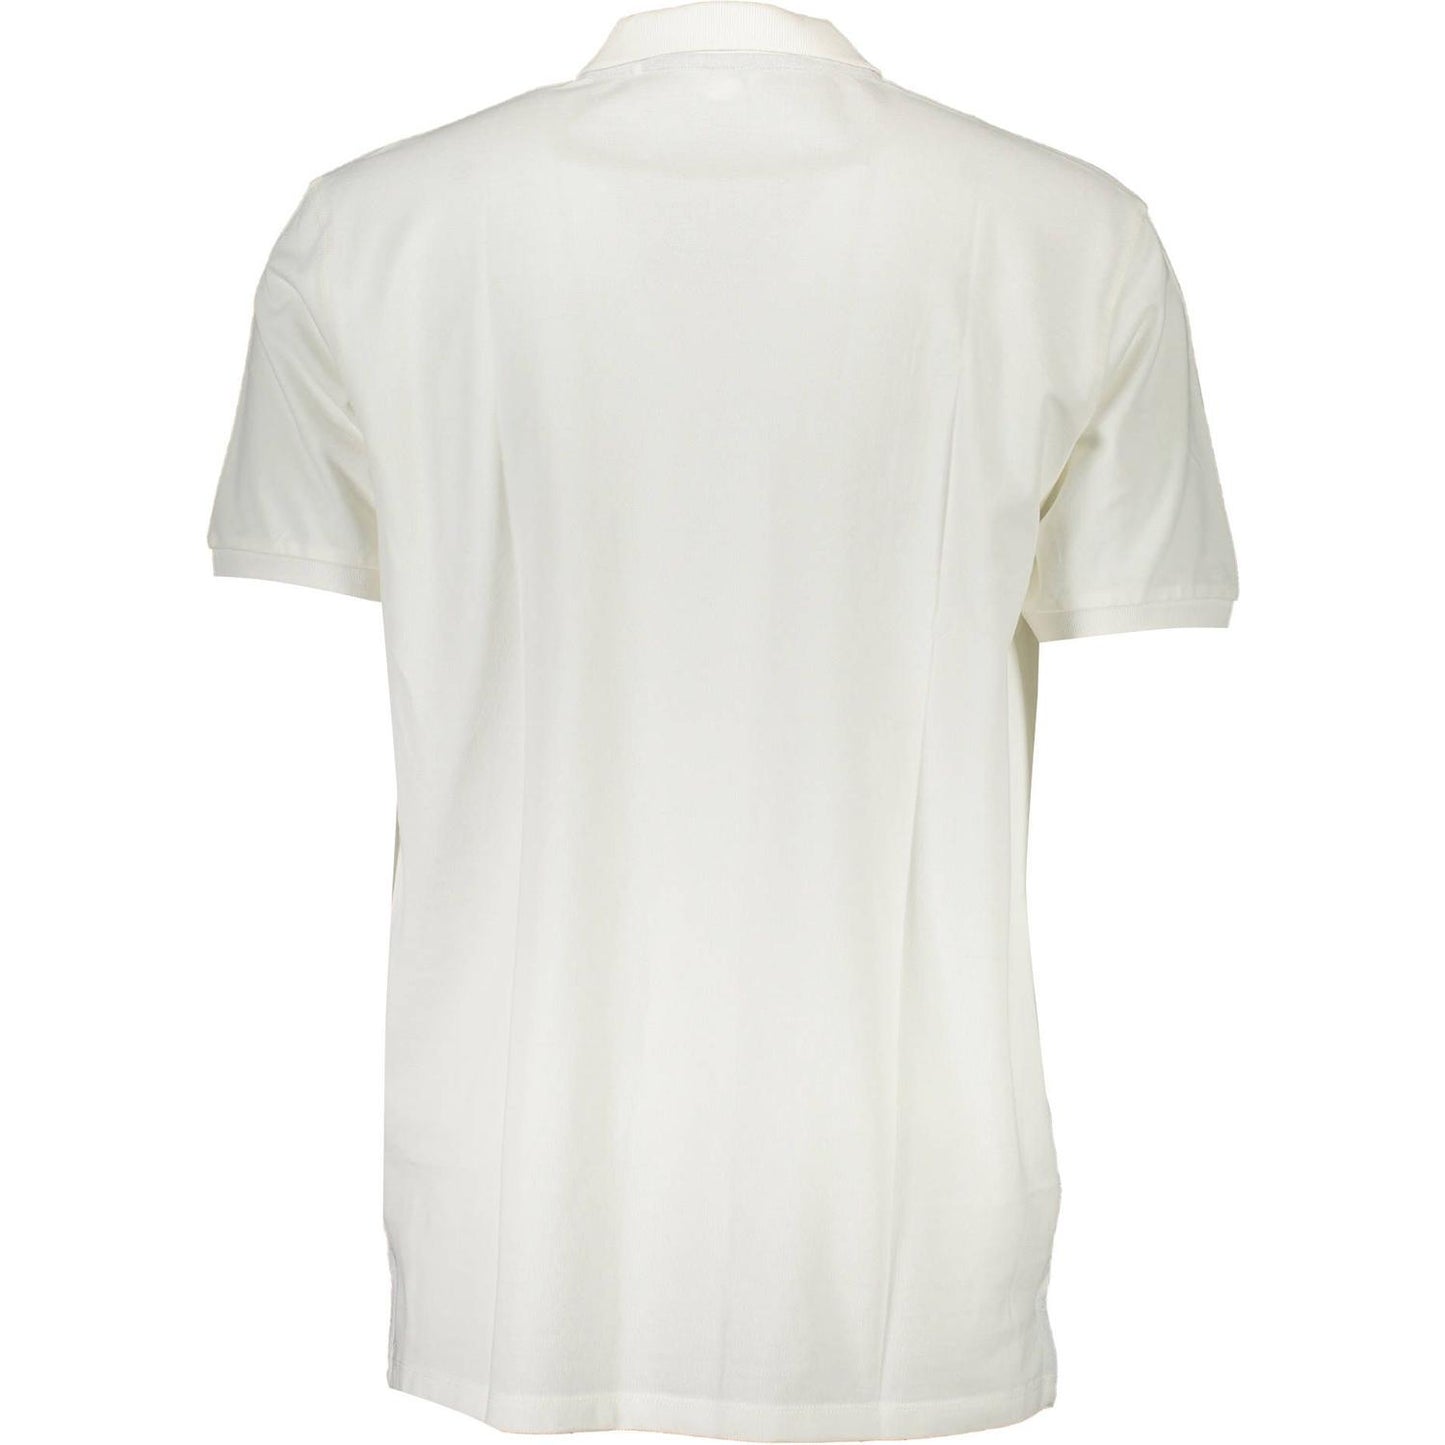 U.S. POLO ASSN. Chic White Embroidered Polo for Men chic-white-embroidered-polo-for-men-1